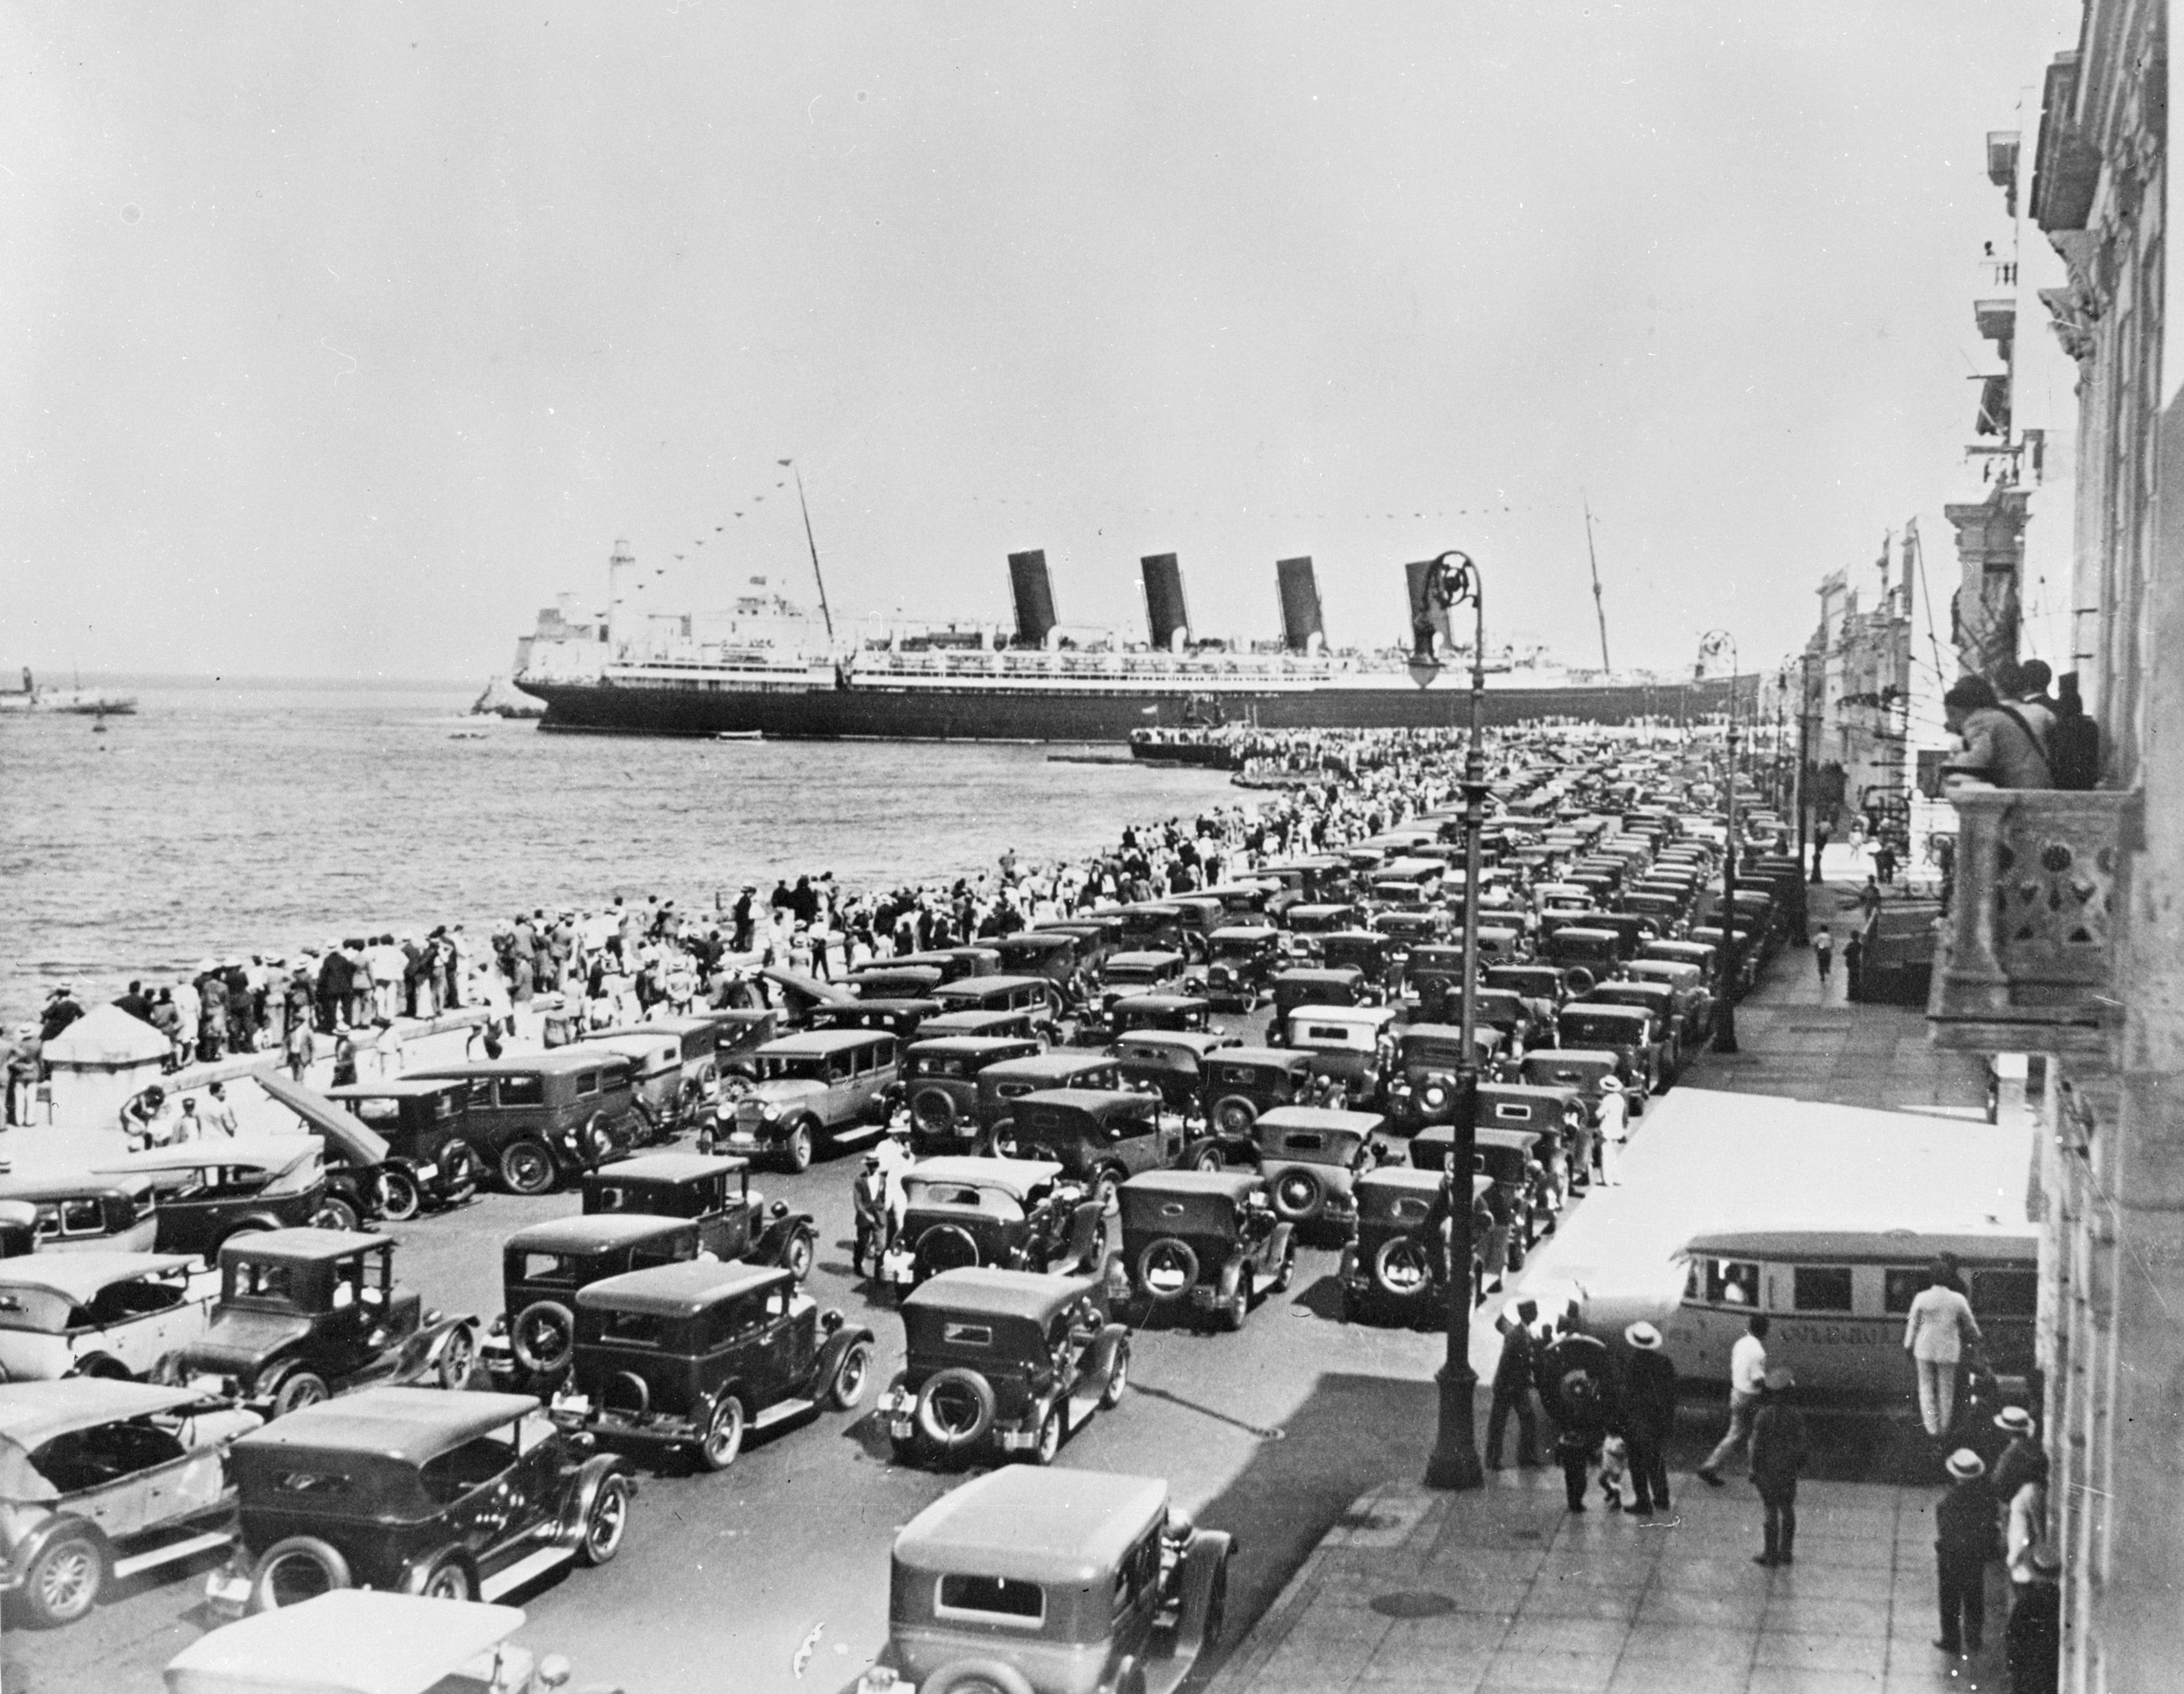 Hordes of people and motor cars crowd the waterfront as the Cunard liner Mauretania pulls into Havana, Cuba. 1925.